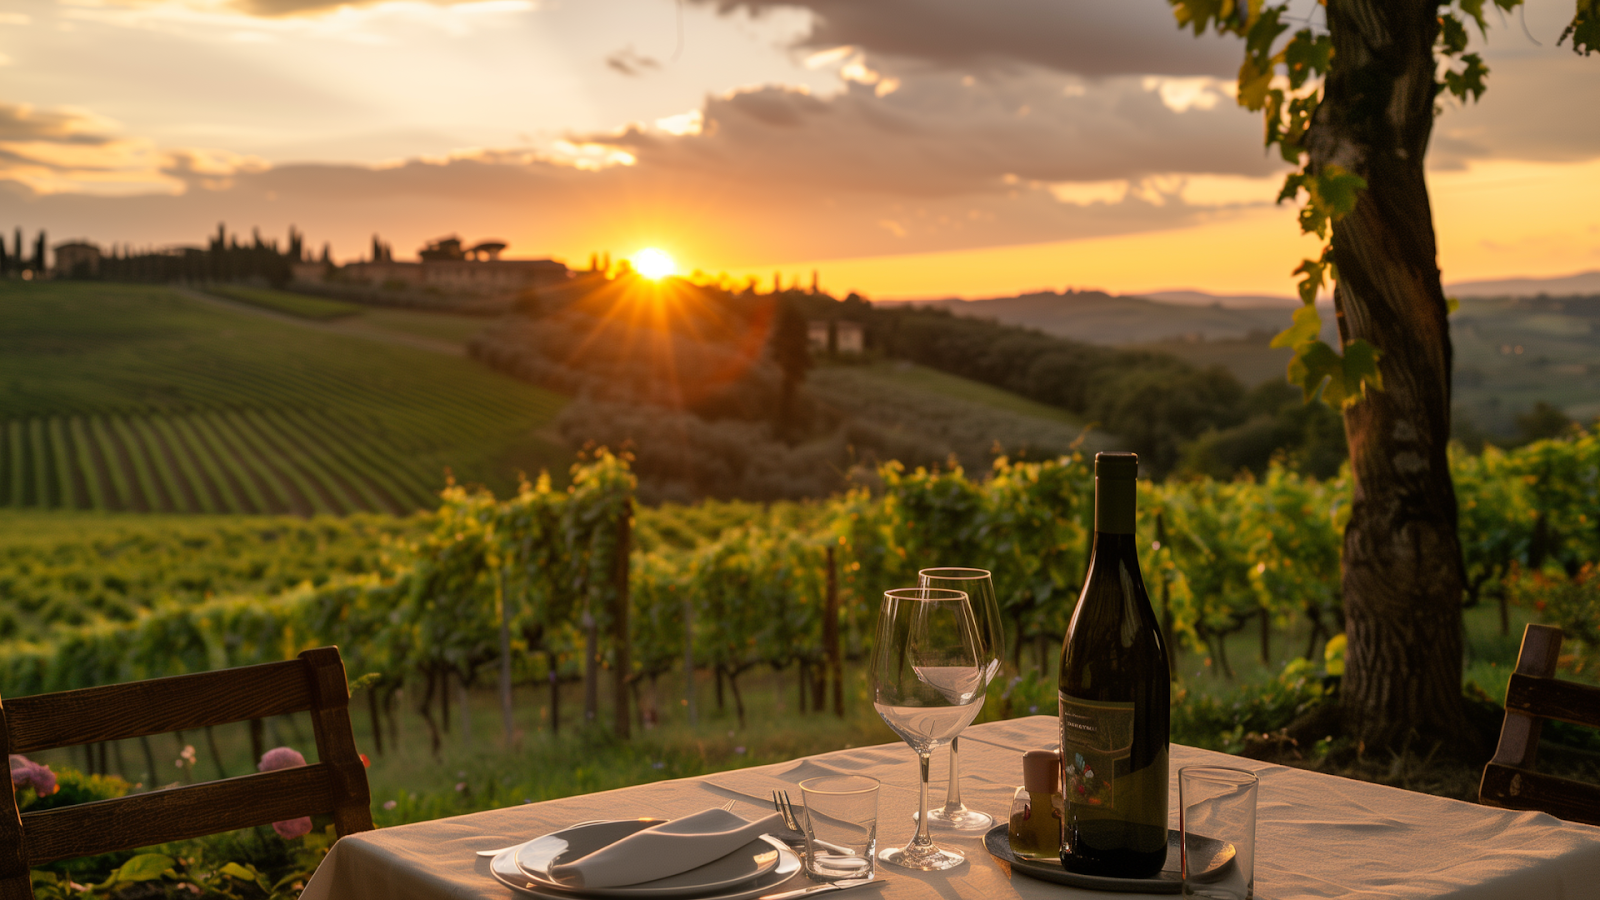 Golden hour view from a Tuscan villa terrace with dinner setup overlooking vineyard-covered hills.